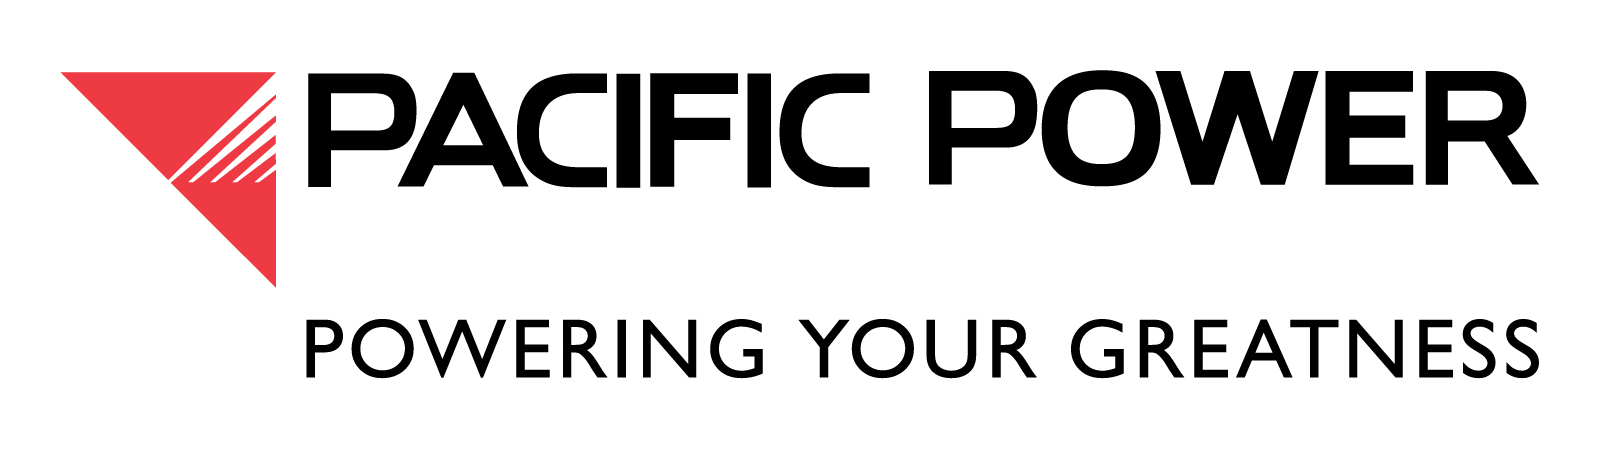 Pacific Power: Powering Your Greatness